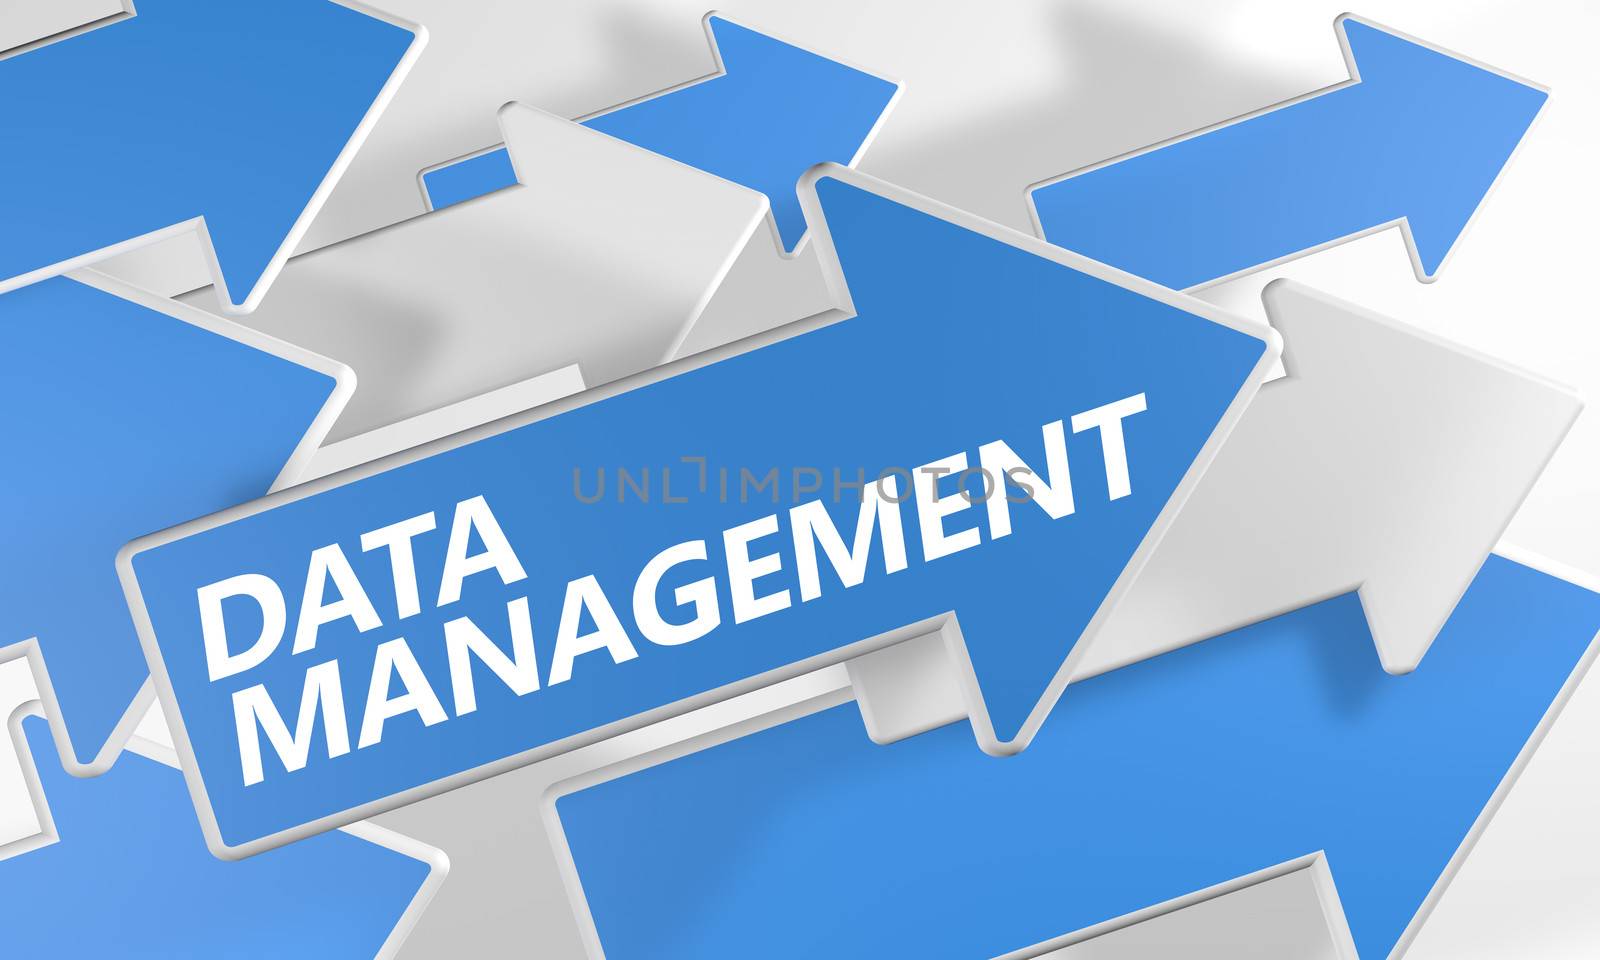 Data Management 3d render concept with blue and white arrows flying over a white background.